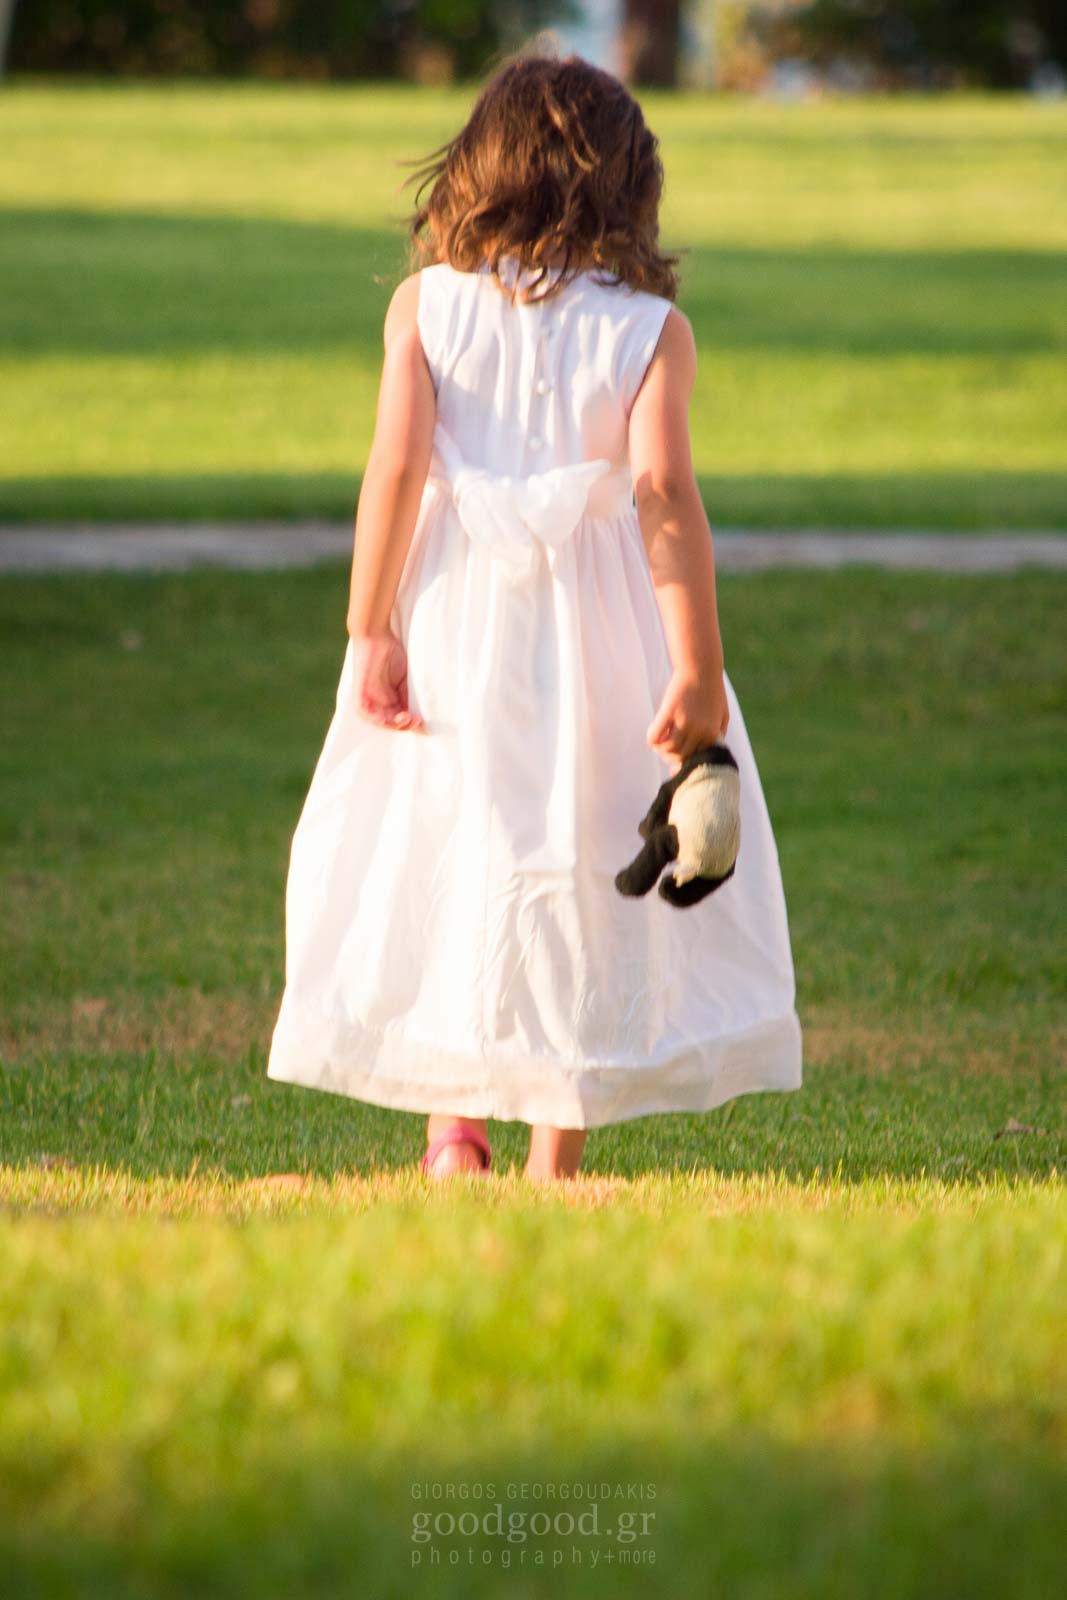 Baptism photo of a little girl standing on the grass holding a doll